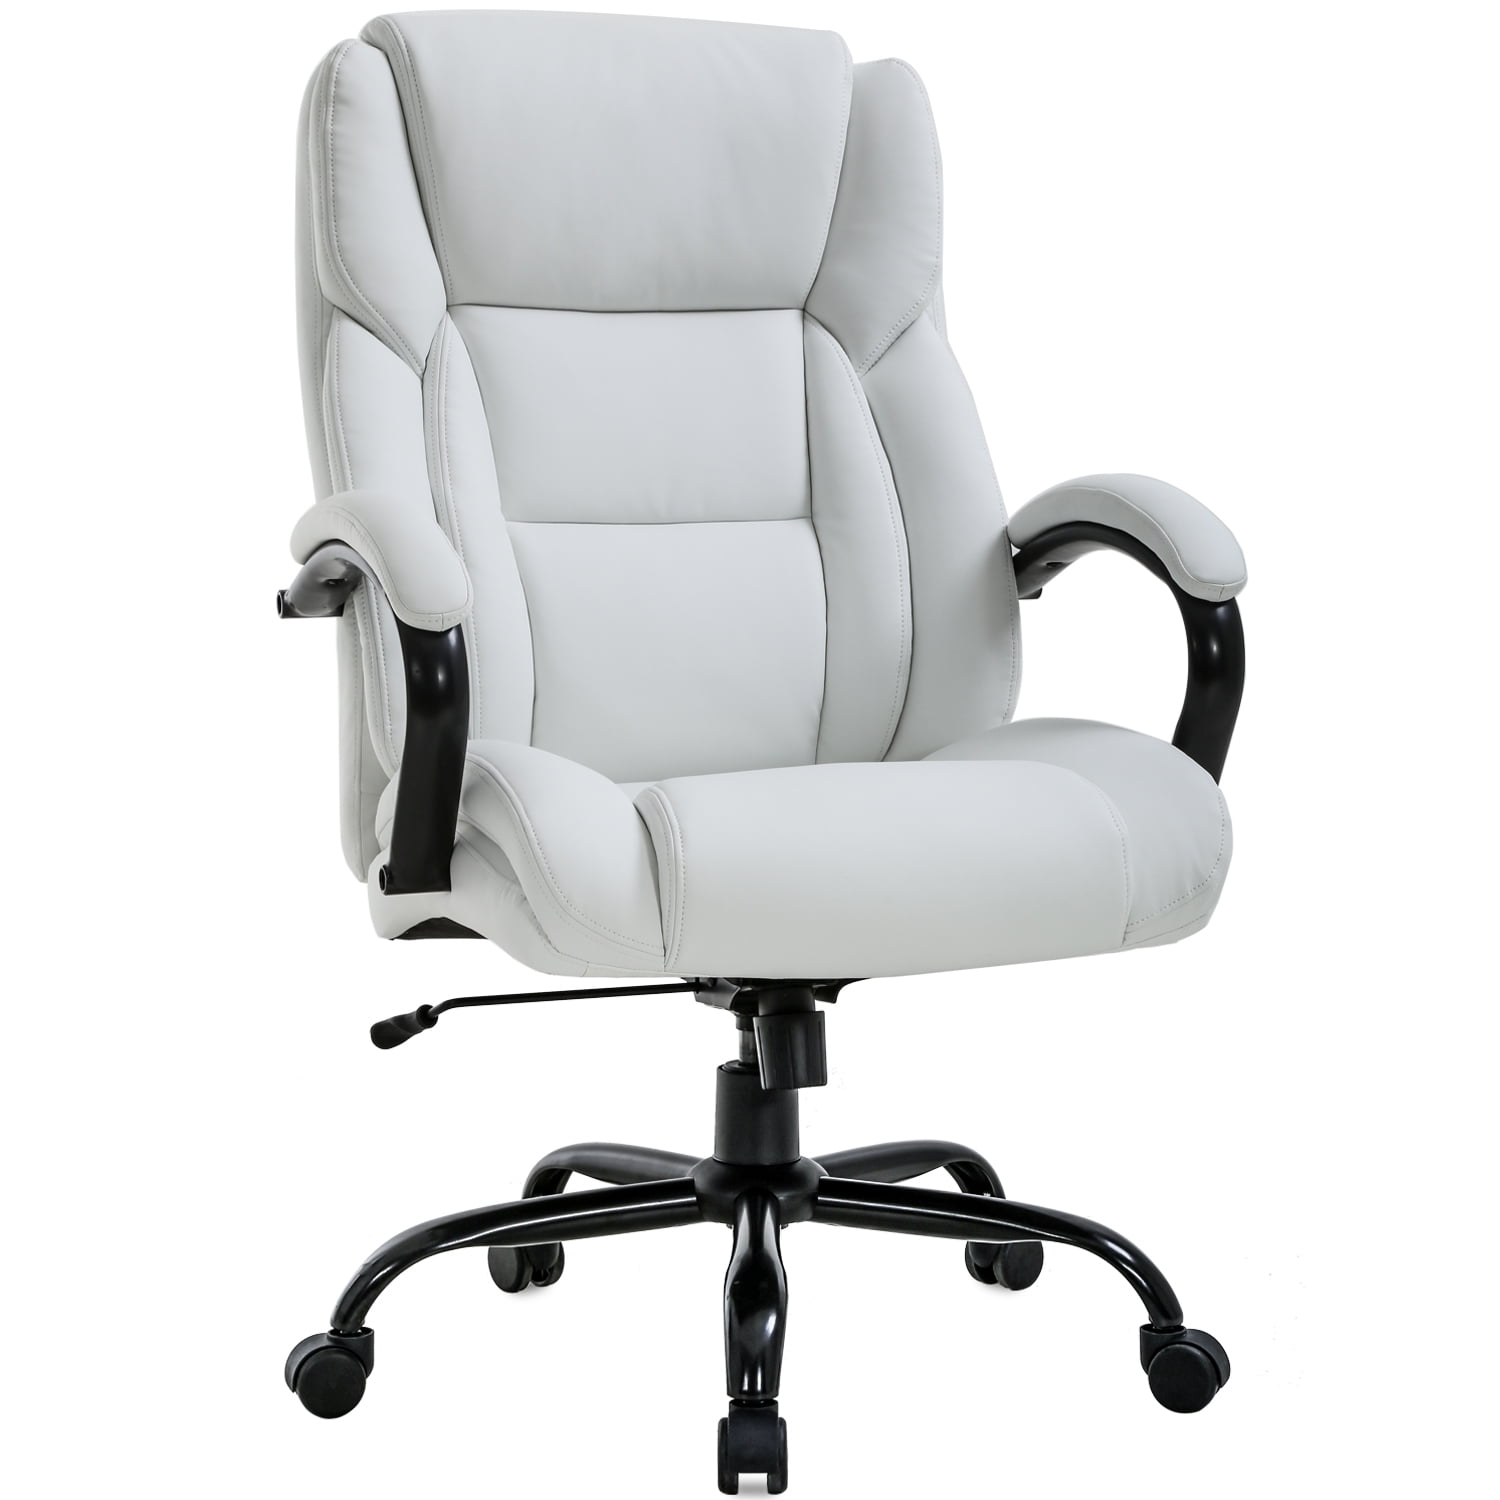 Office Chair Big and Tall 500lbs Ergonomic Computer Chair High Back PU Leather Wide Seat Desk Chair with Lumbar Support Arms Executive Task Chair for Hone Office,White 